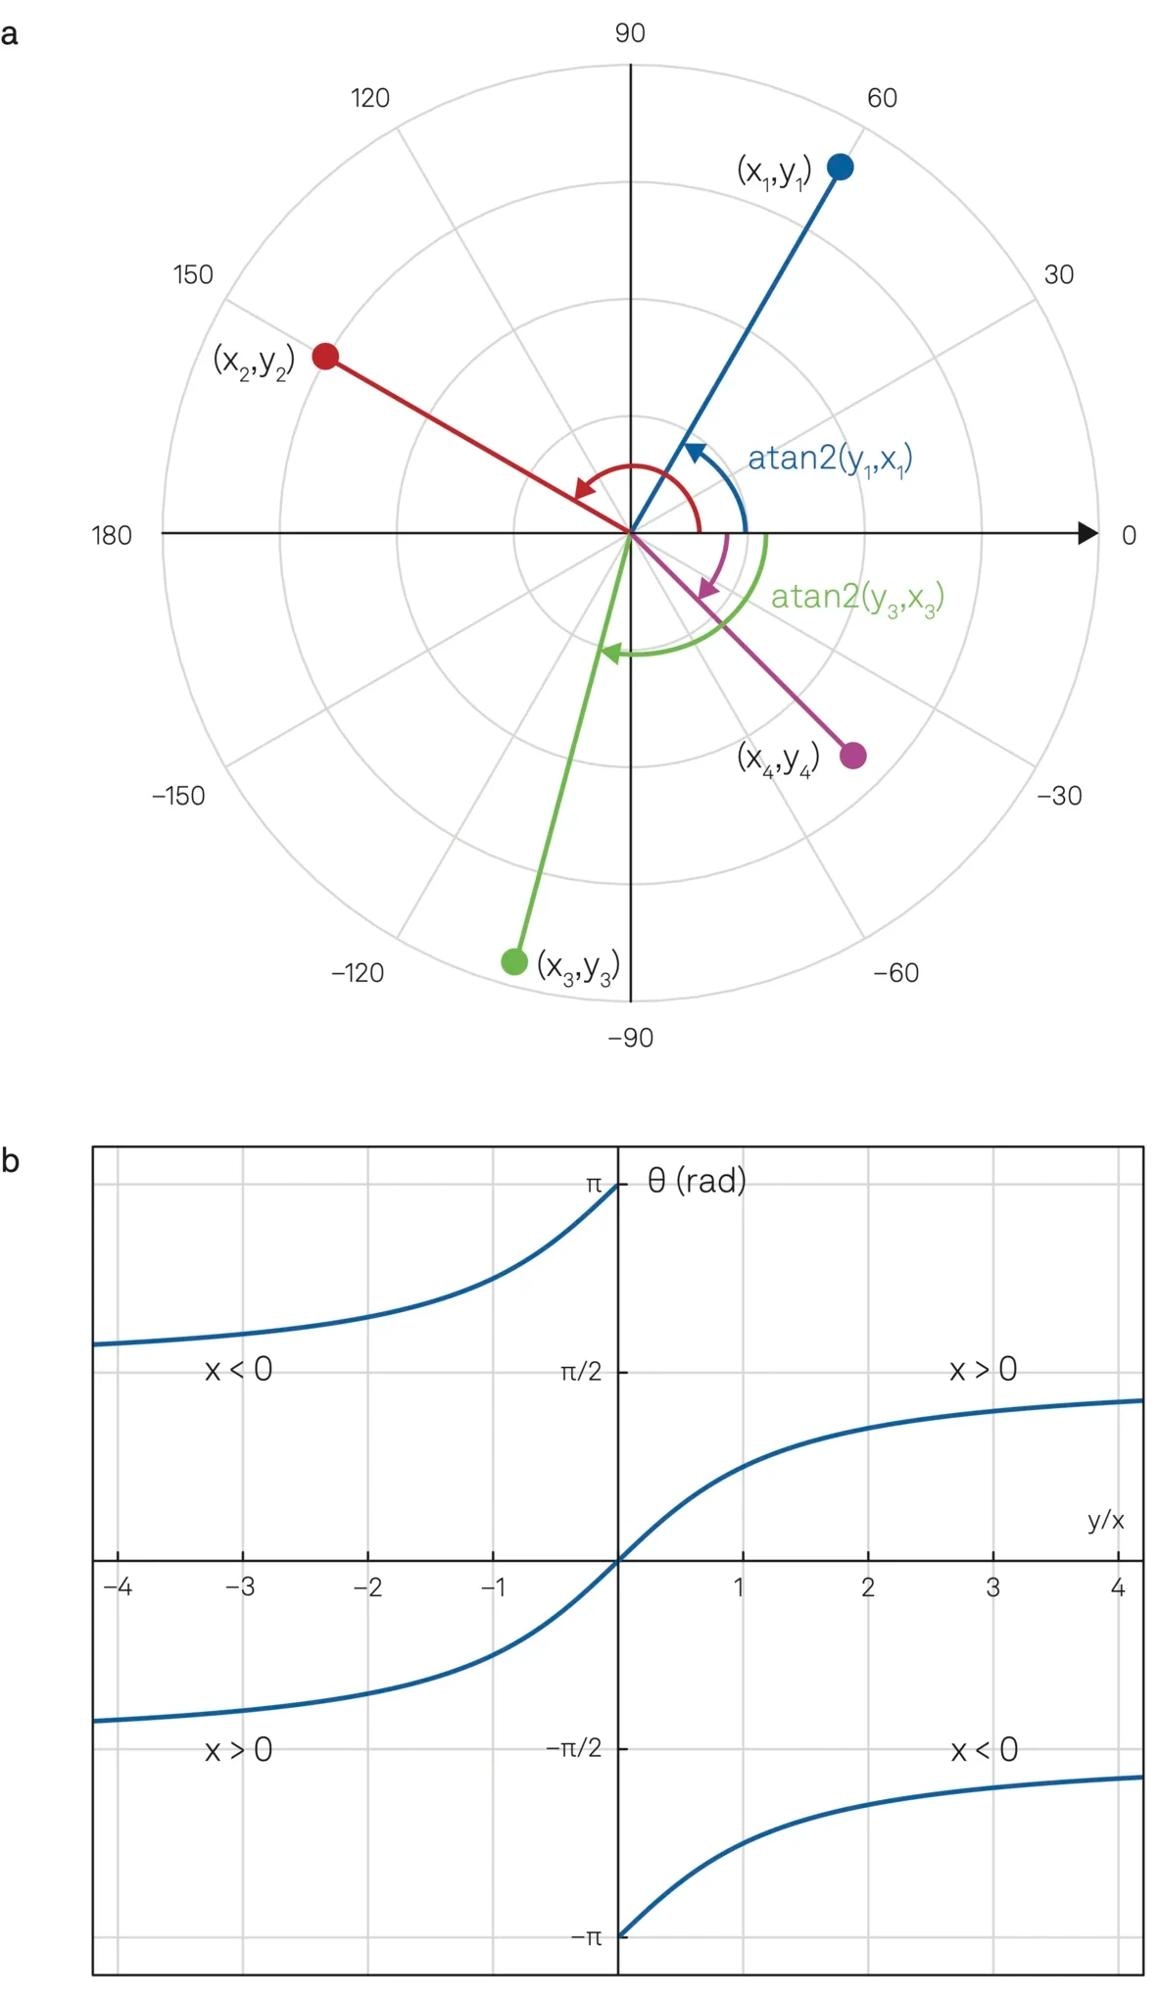 (a) Polar coordinates illustrating the phase of a signal component pair (x,y) that covers a range from -180° to +180° represented by atan2(y,x). (b) Depending on the sign of x, atan2(y,x) is a double-valued function versus the ratio y/x returning the angle between the line to the point (x,y) and the positive x axis.